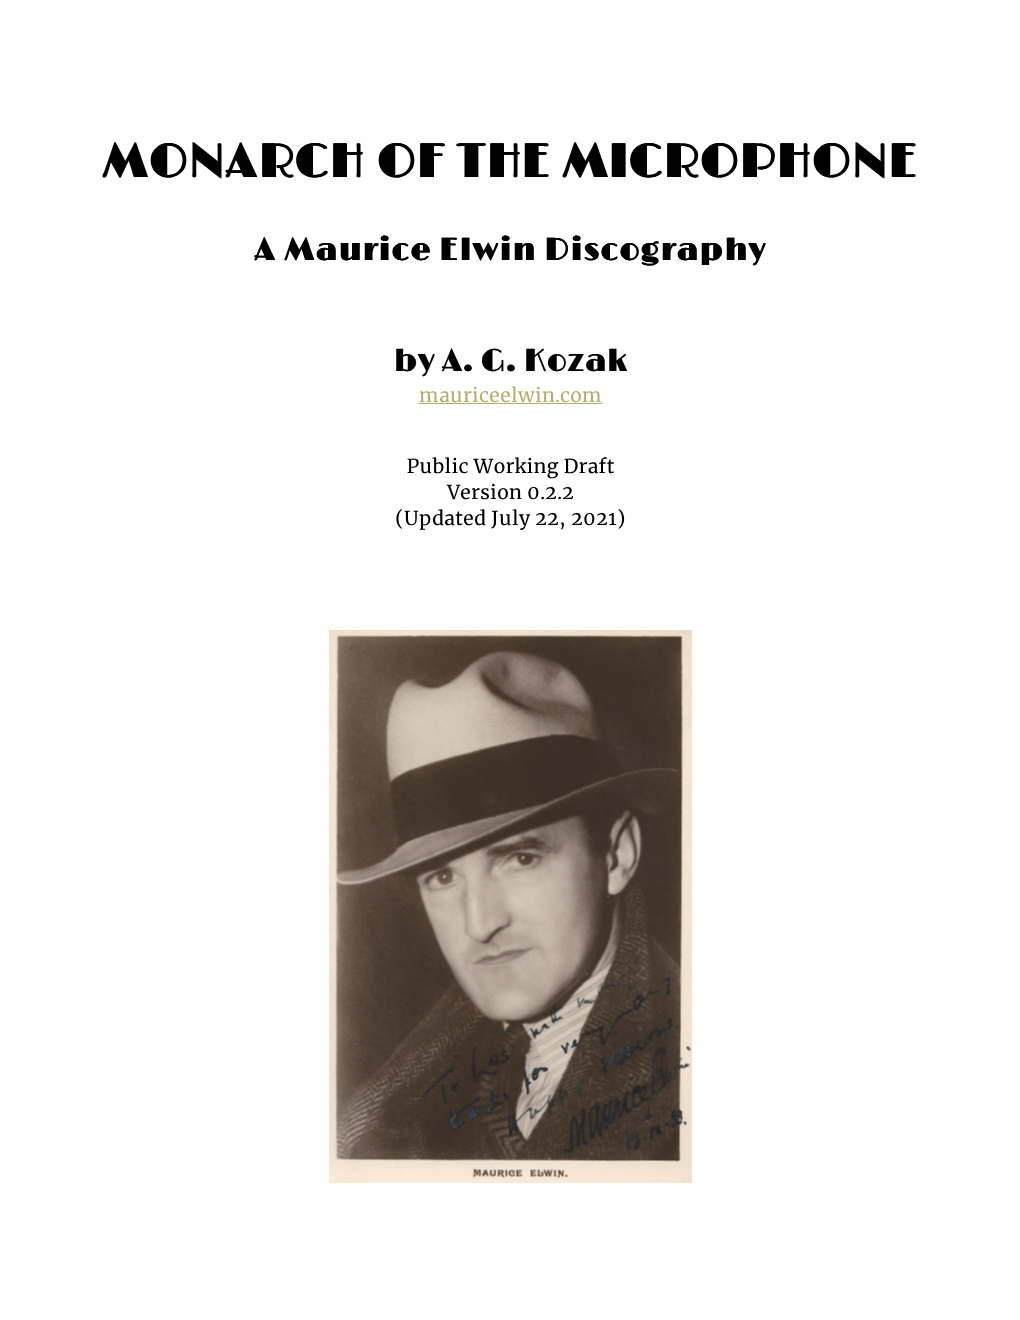 Monarch of the Microphone: a Maurice Elwin Discography by A